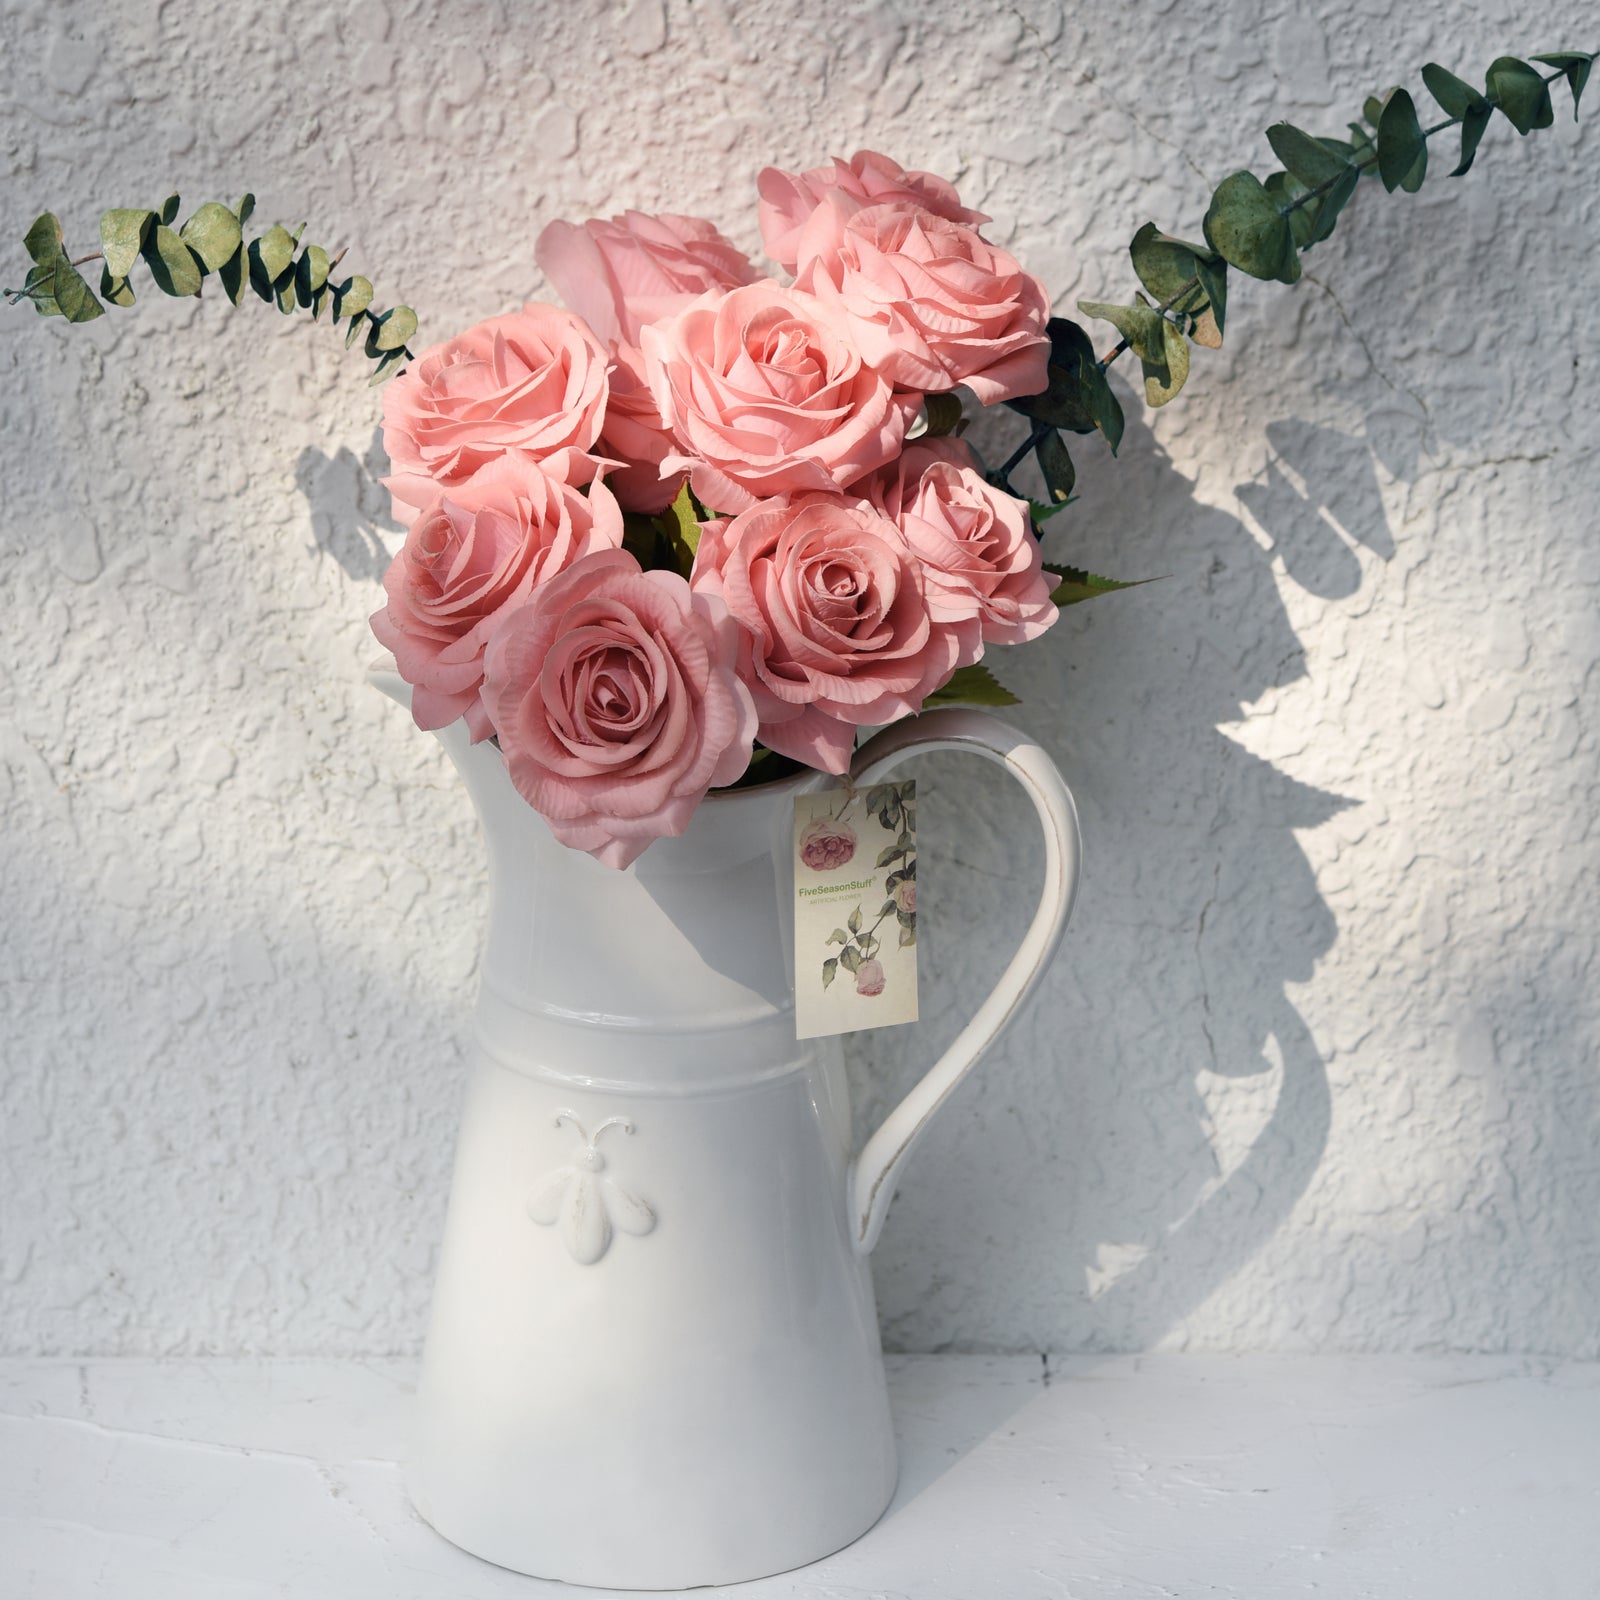 Real Touch 10 Stems Dusty Pink Silk Artificial Roses Flowers ‘Petals Feel and Look like Fresh Roses